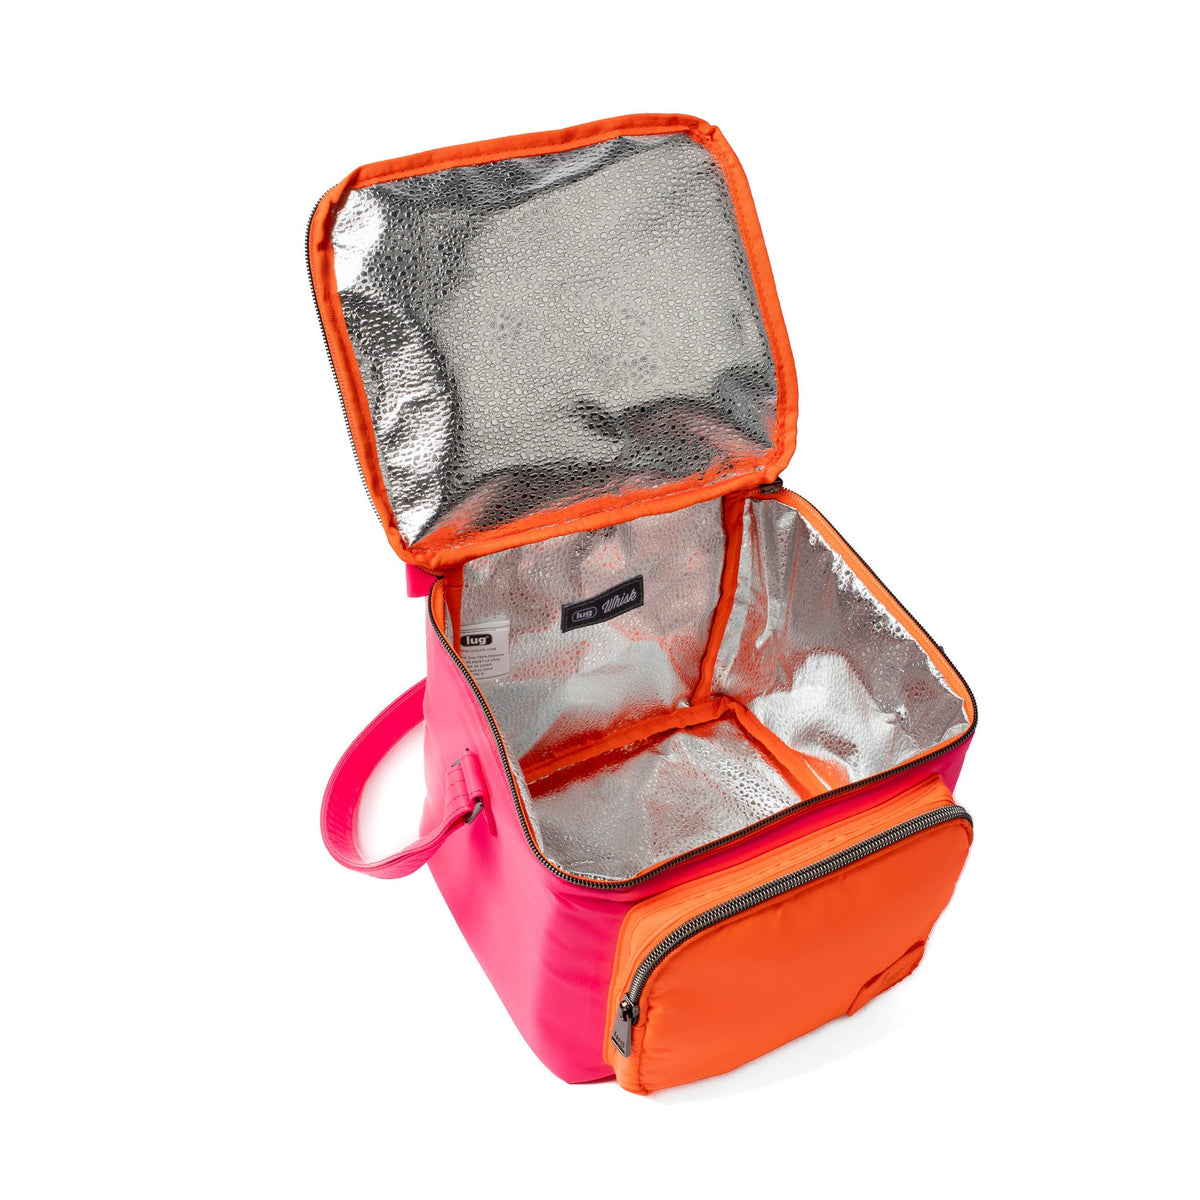 Insulated Lunch Box – Whiskware